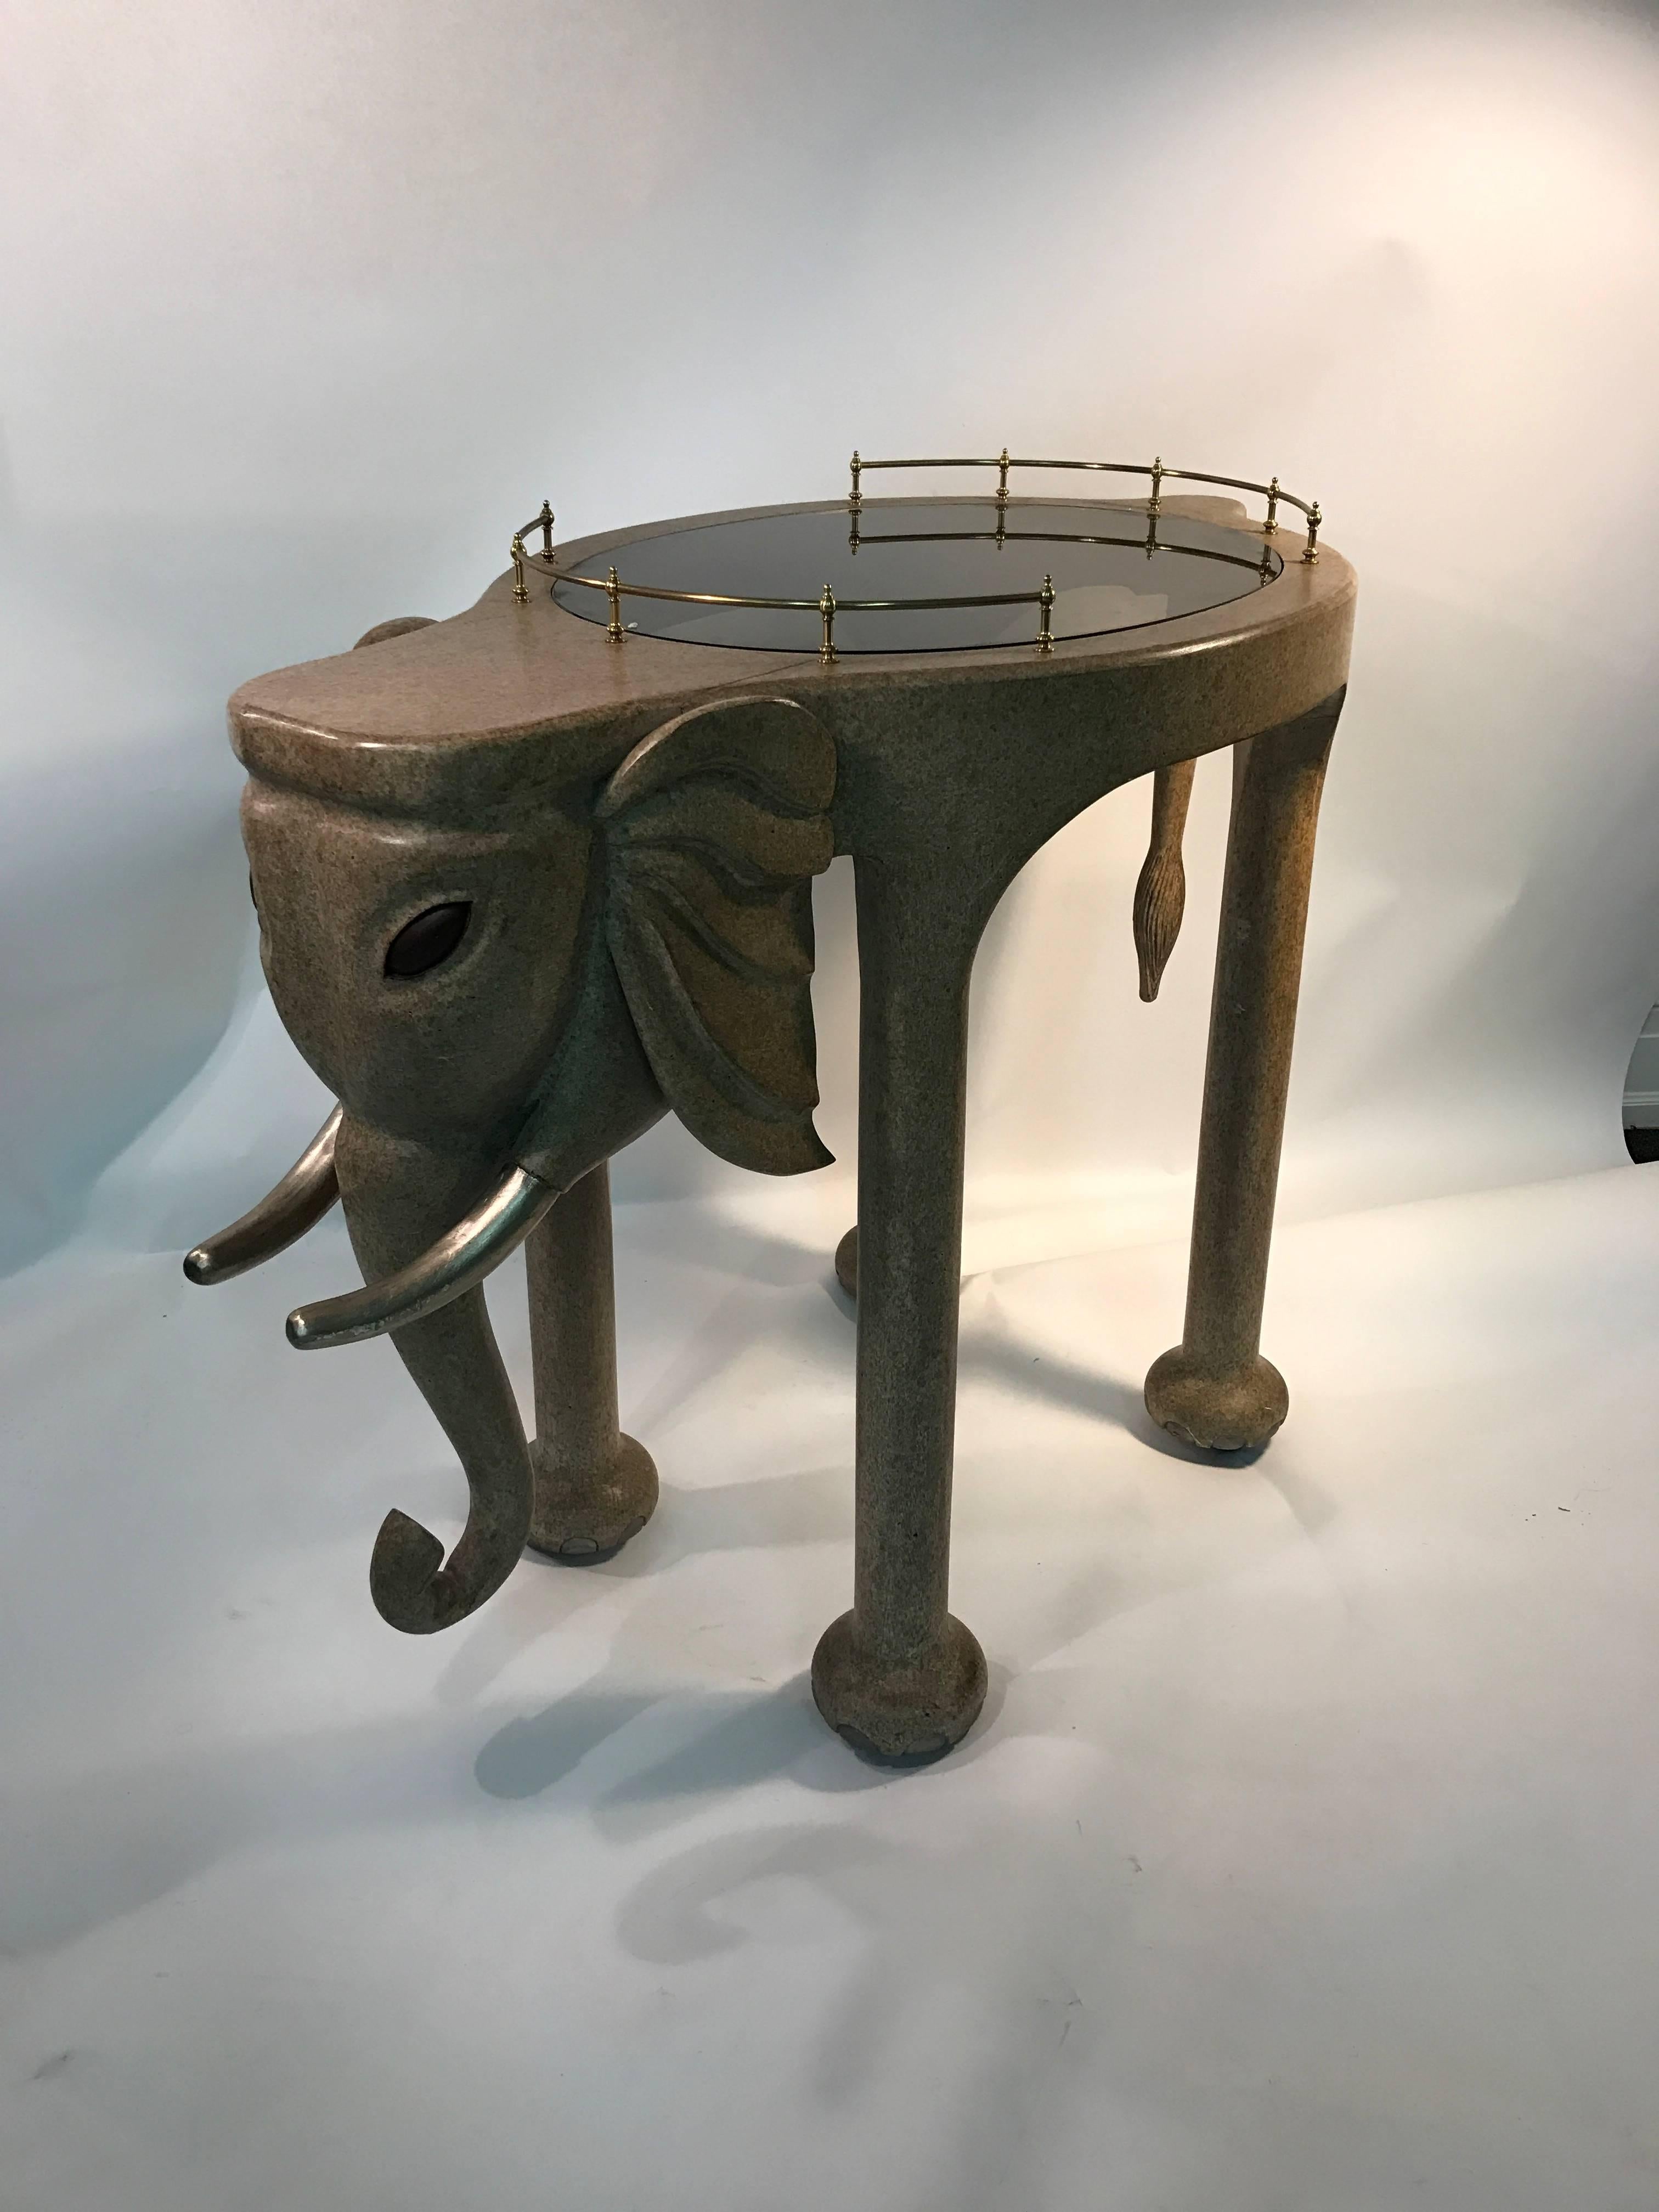 An exquisite and rare elephant bar cart by Marge Carson with brass-gallery, inset glass top, and wheels, circa 1980. Original label underneath. Great vintage condition.